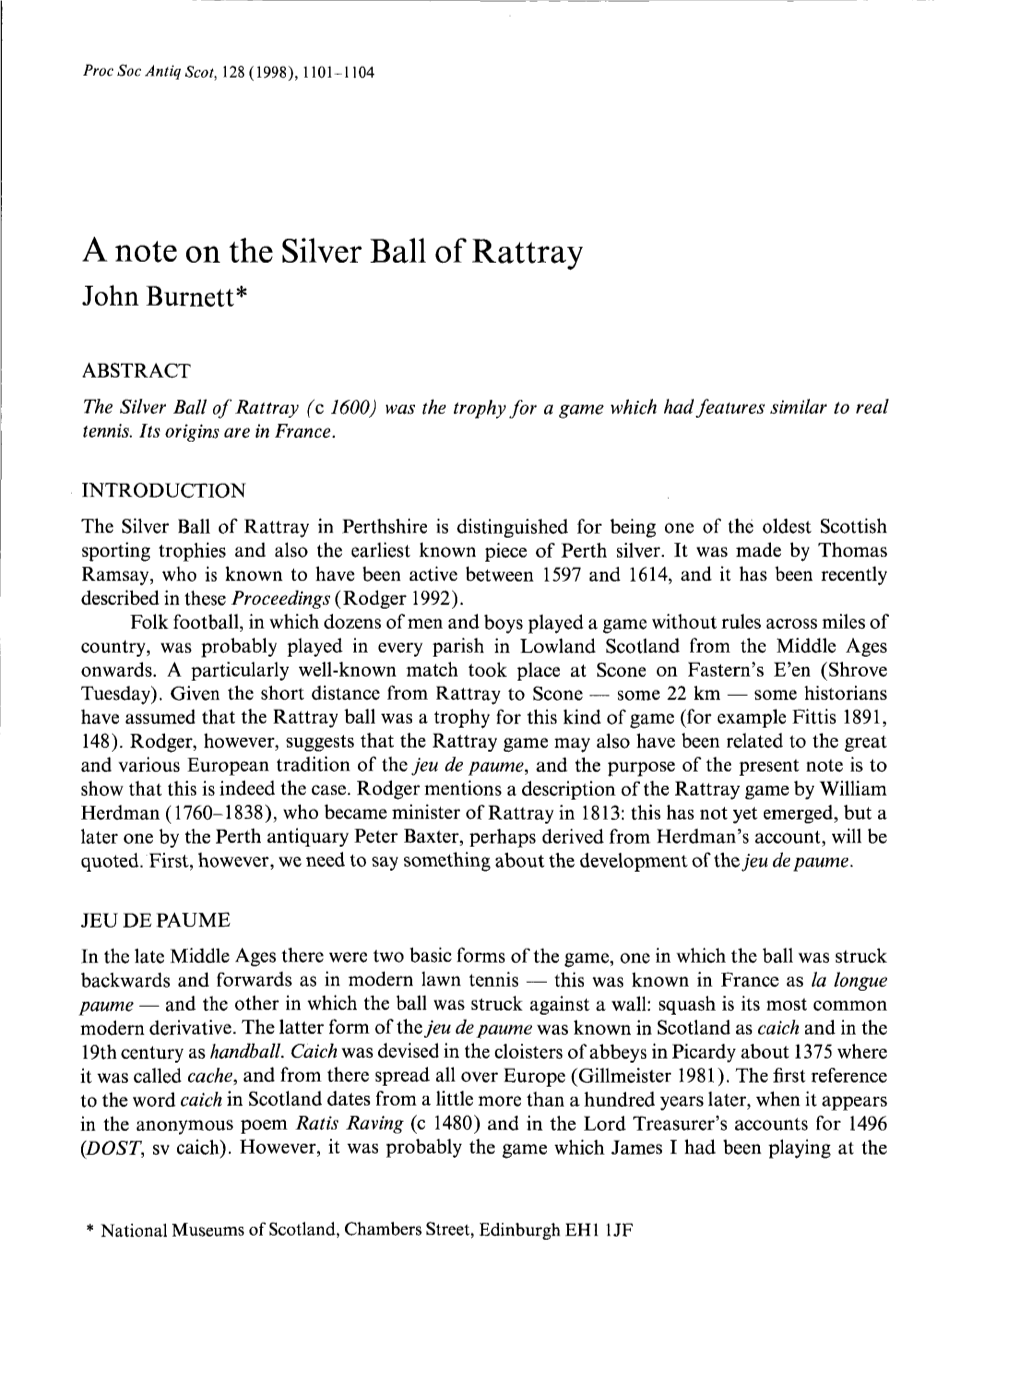 A Note on the Silver Ball of Rattray